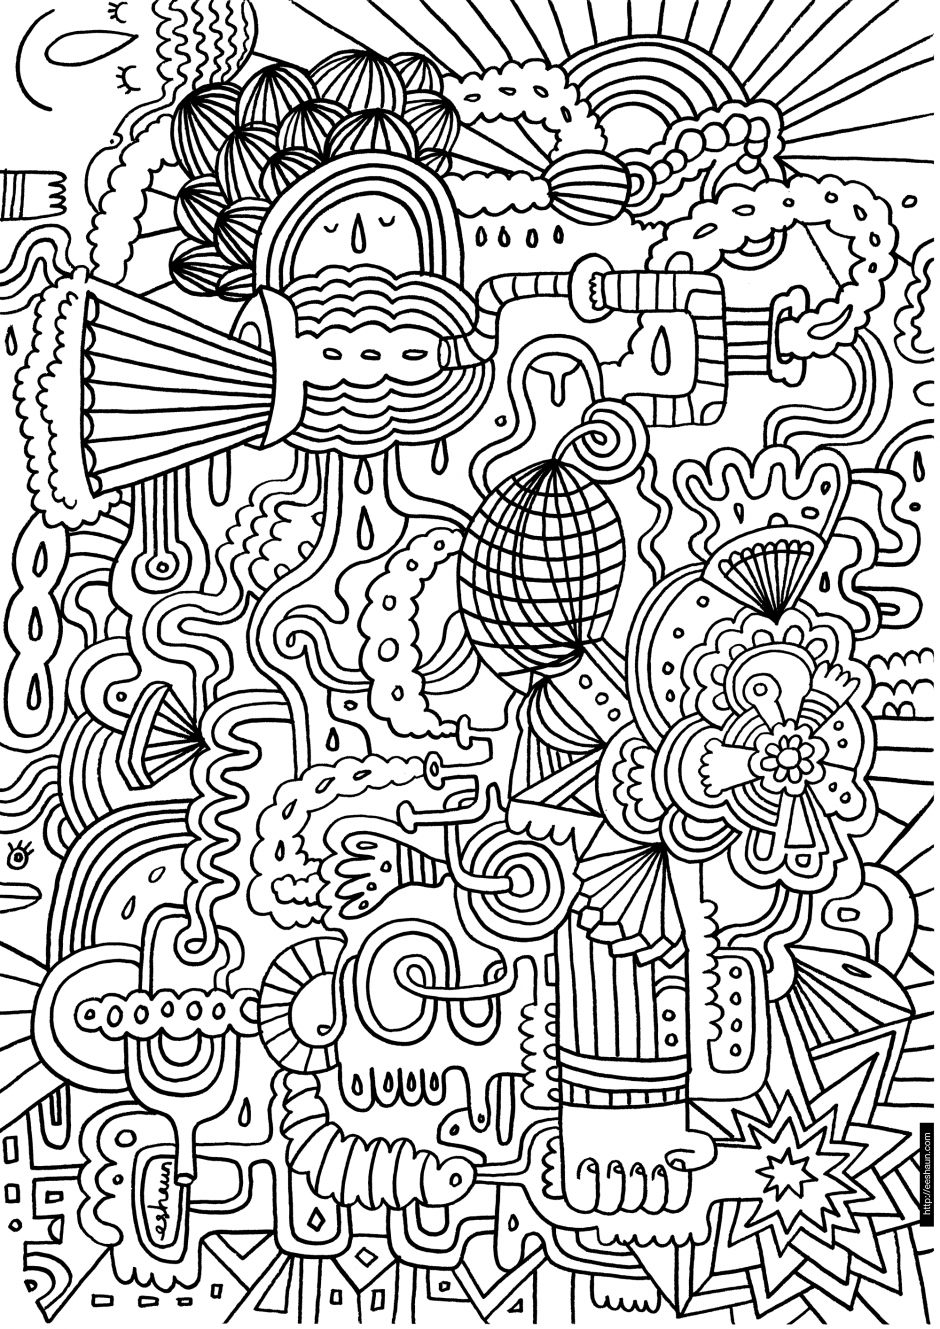 Difficult Coloring Printables - Coloring Pages for Kids and for Adults